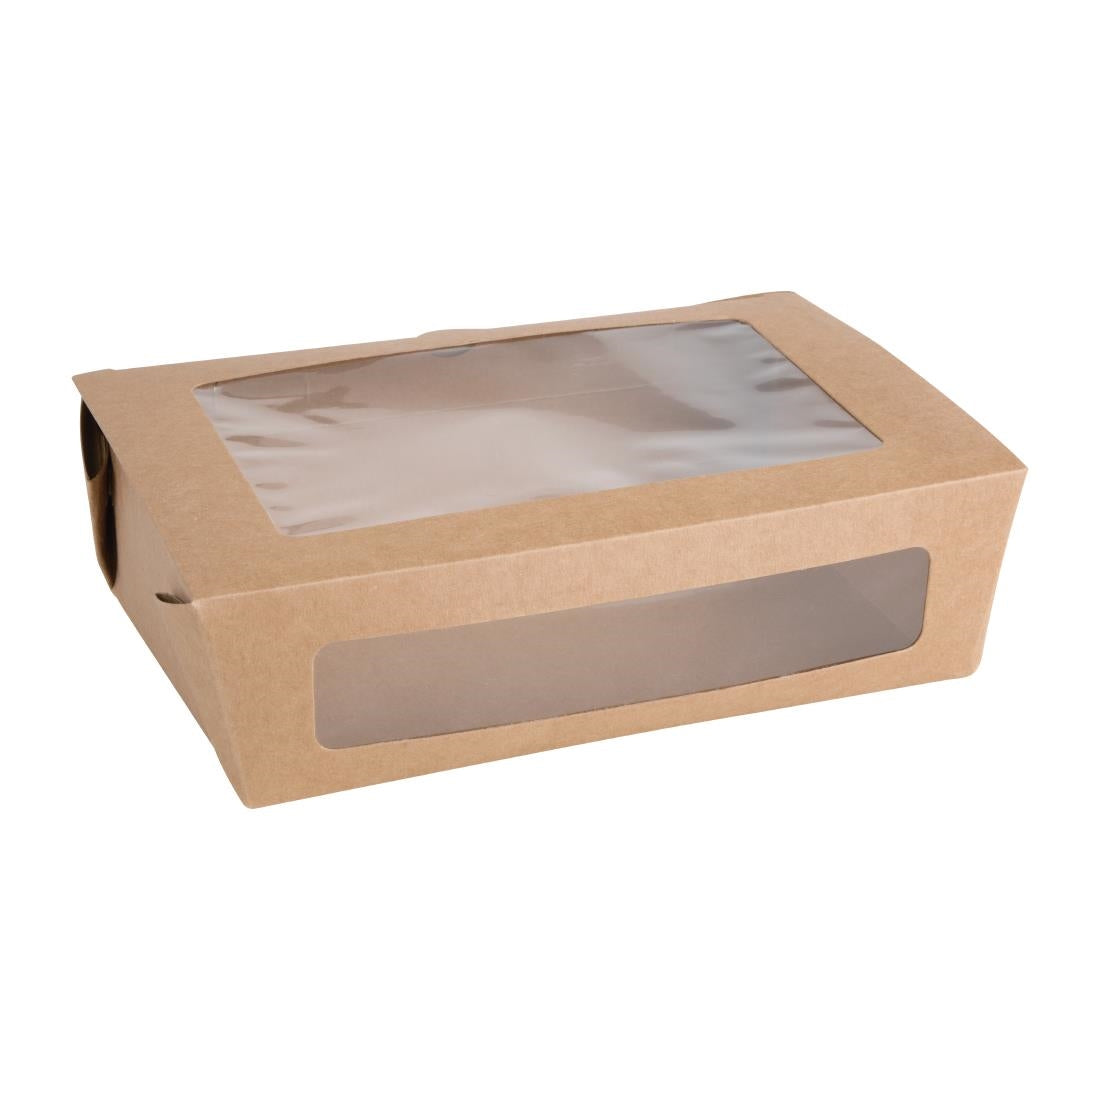 FN899 Fiesta Salad Box with PET Window 1600ml (Pack of 100) JD Catering Equipment Solutions Ltd